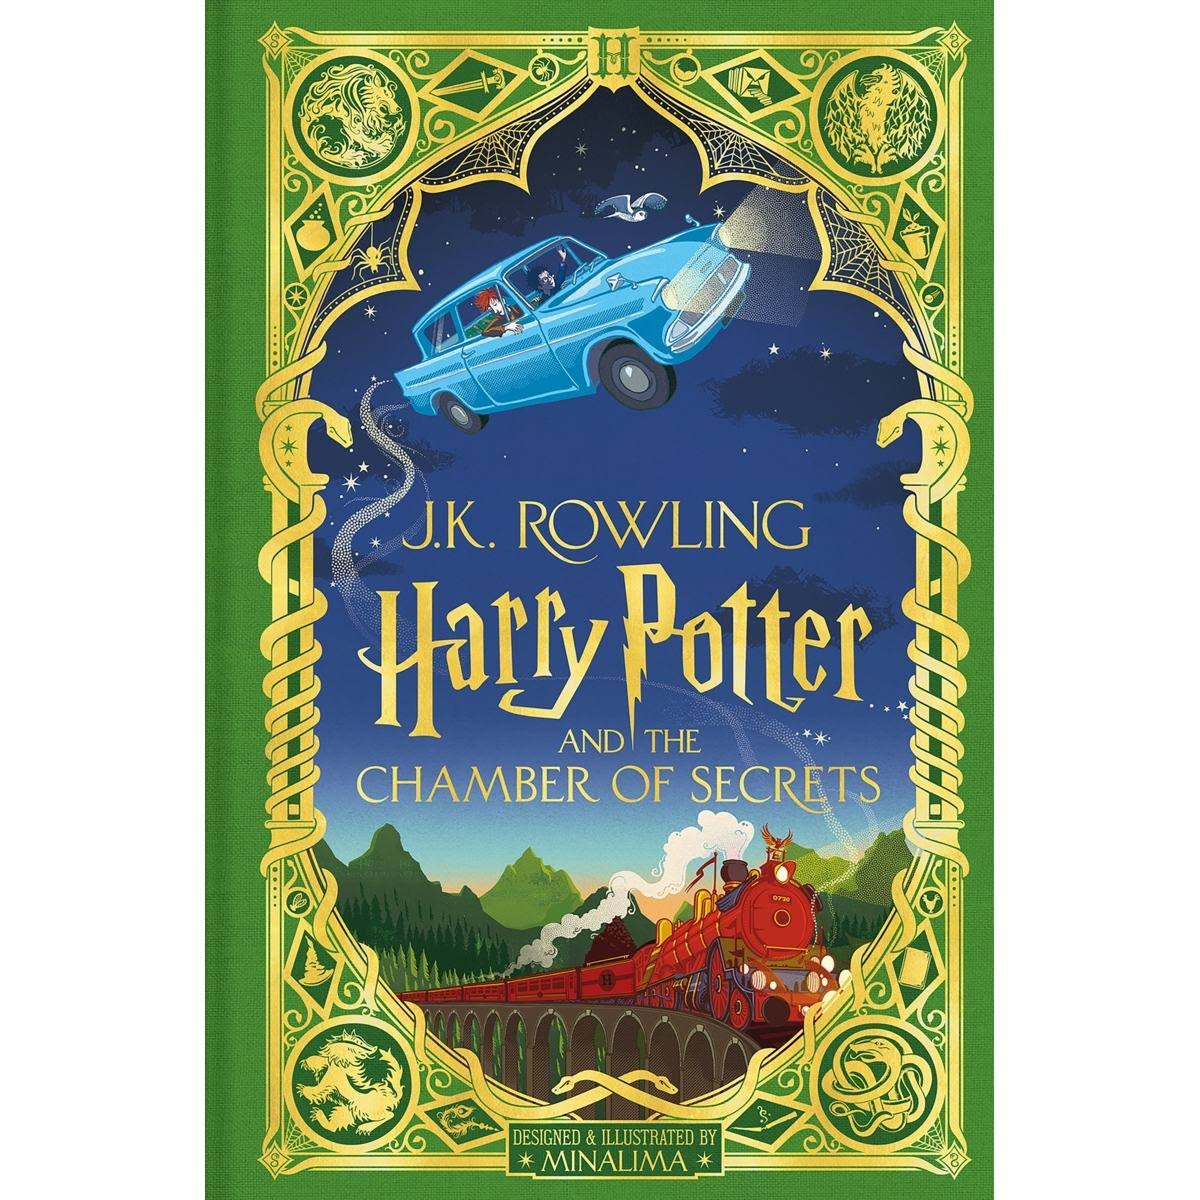 Harry Potter and The Chamber of Secrets: MinaLima Edition by J.K. Rowling